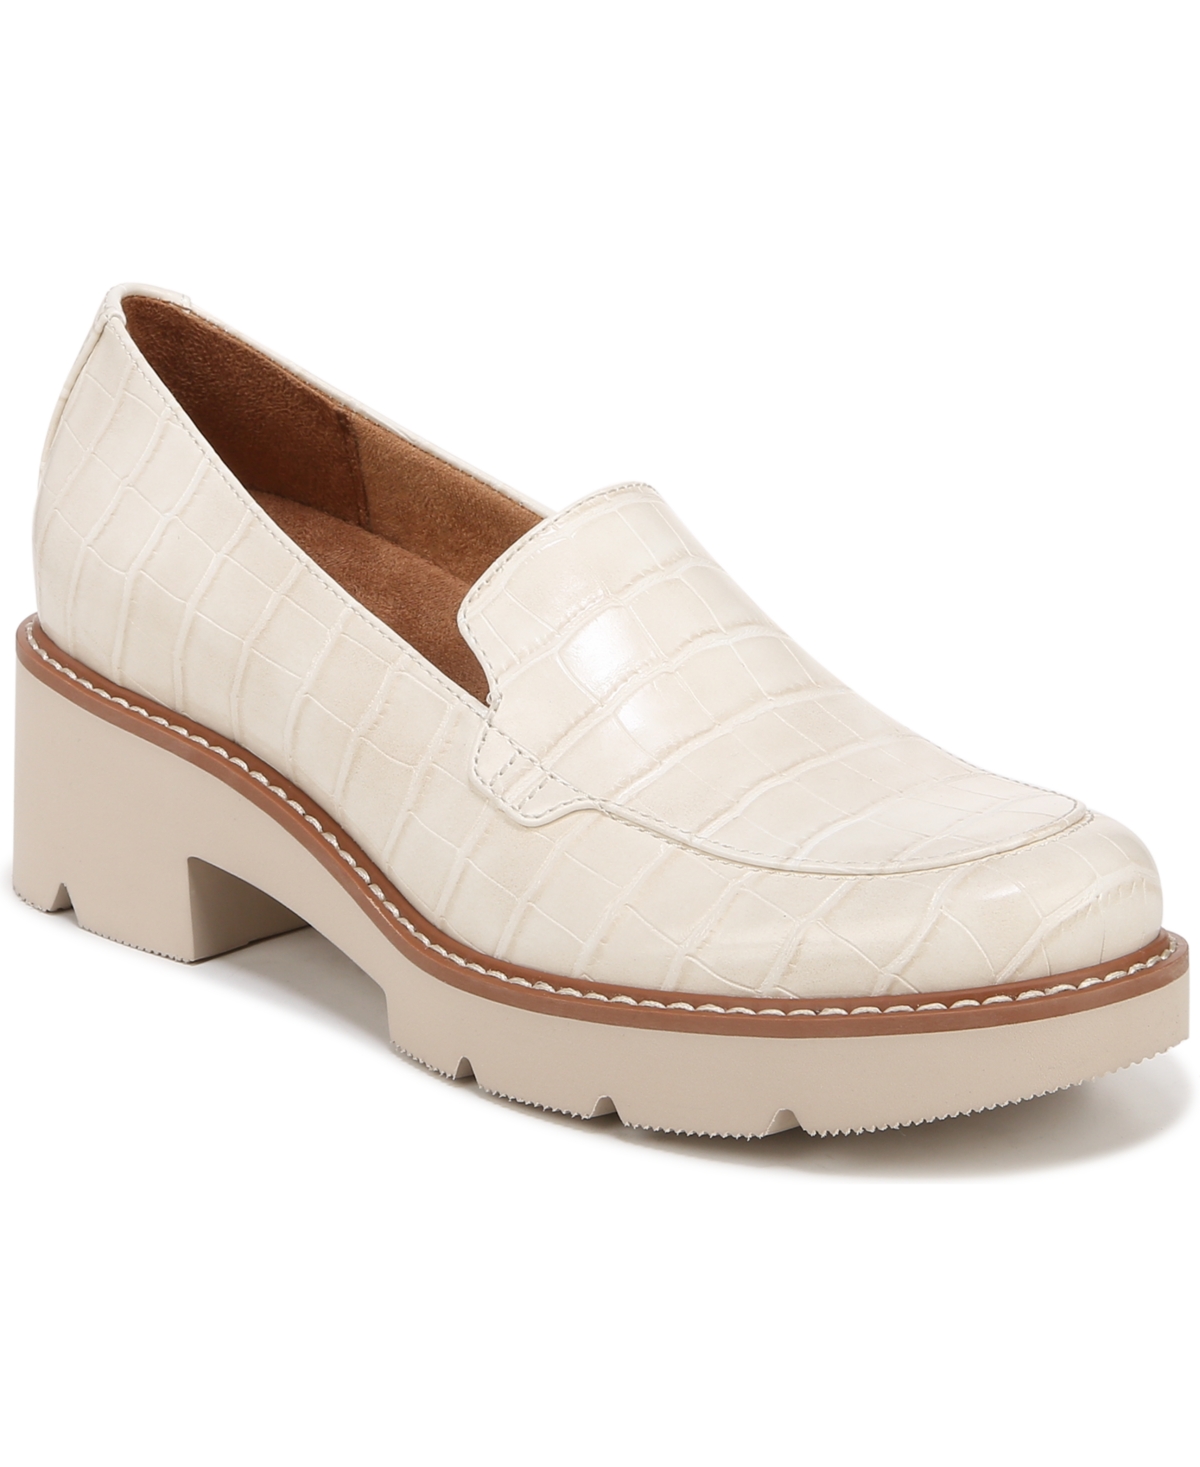 Cabaret Lug Sole Loafers - Porcelain Croco Embossed Faux Leather